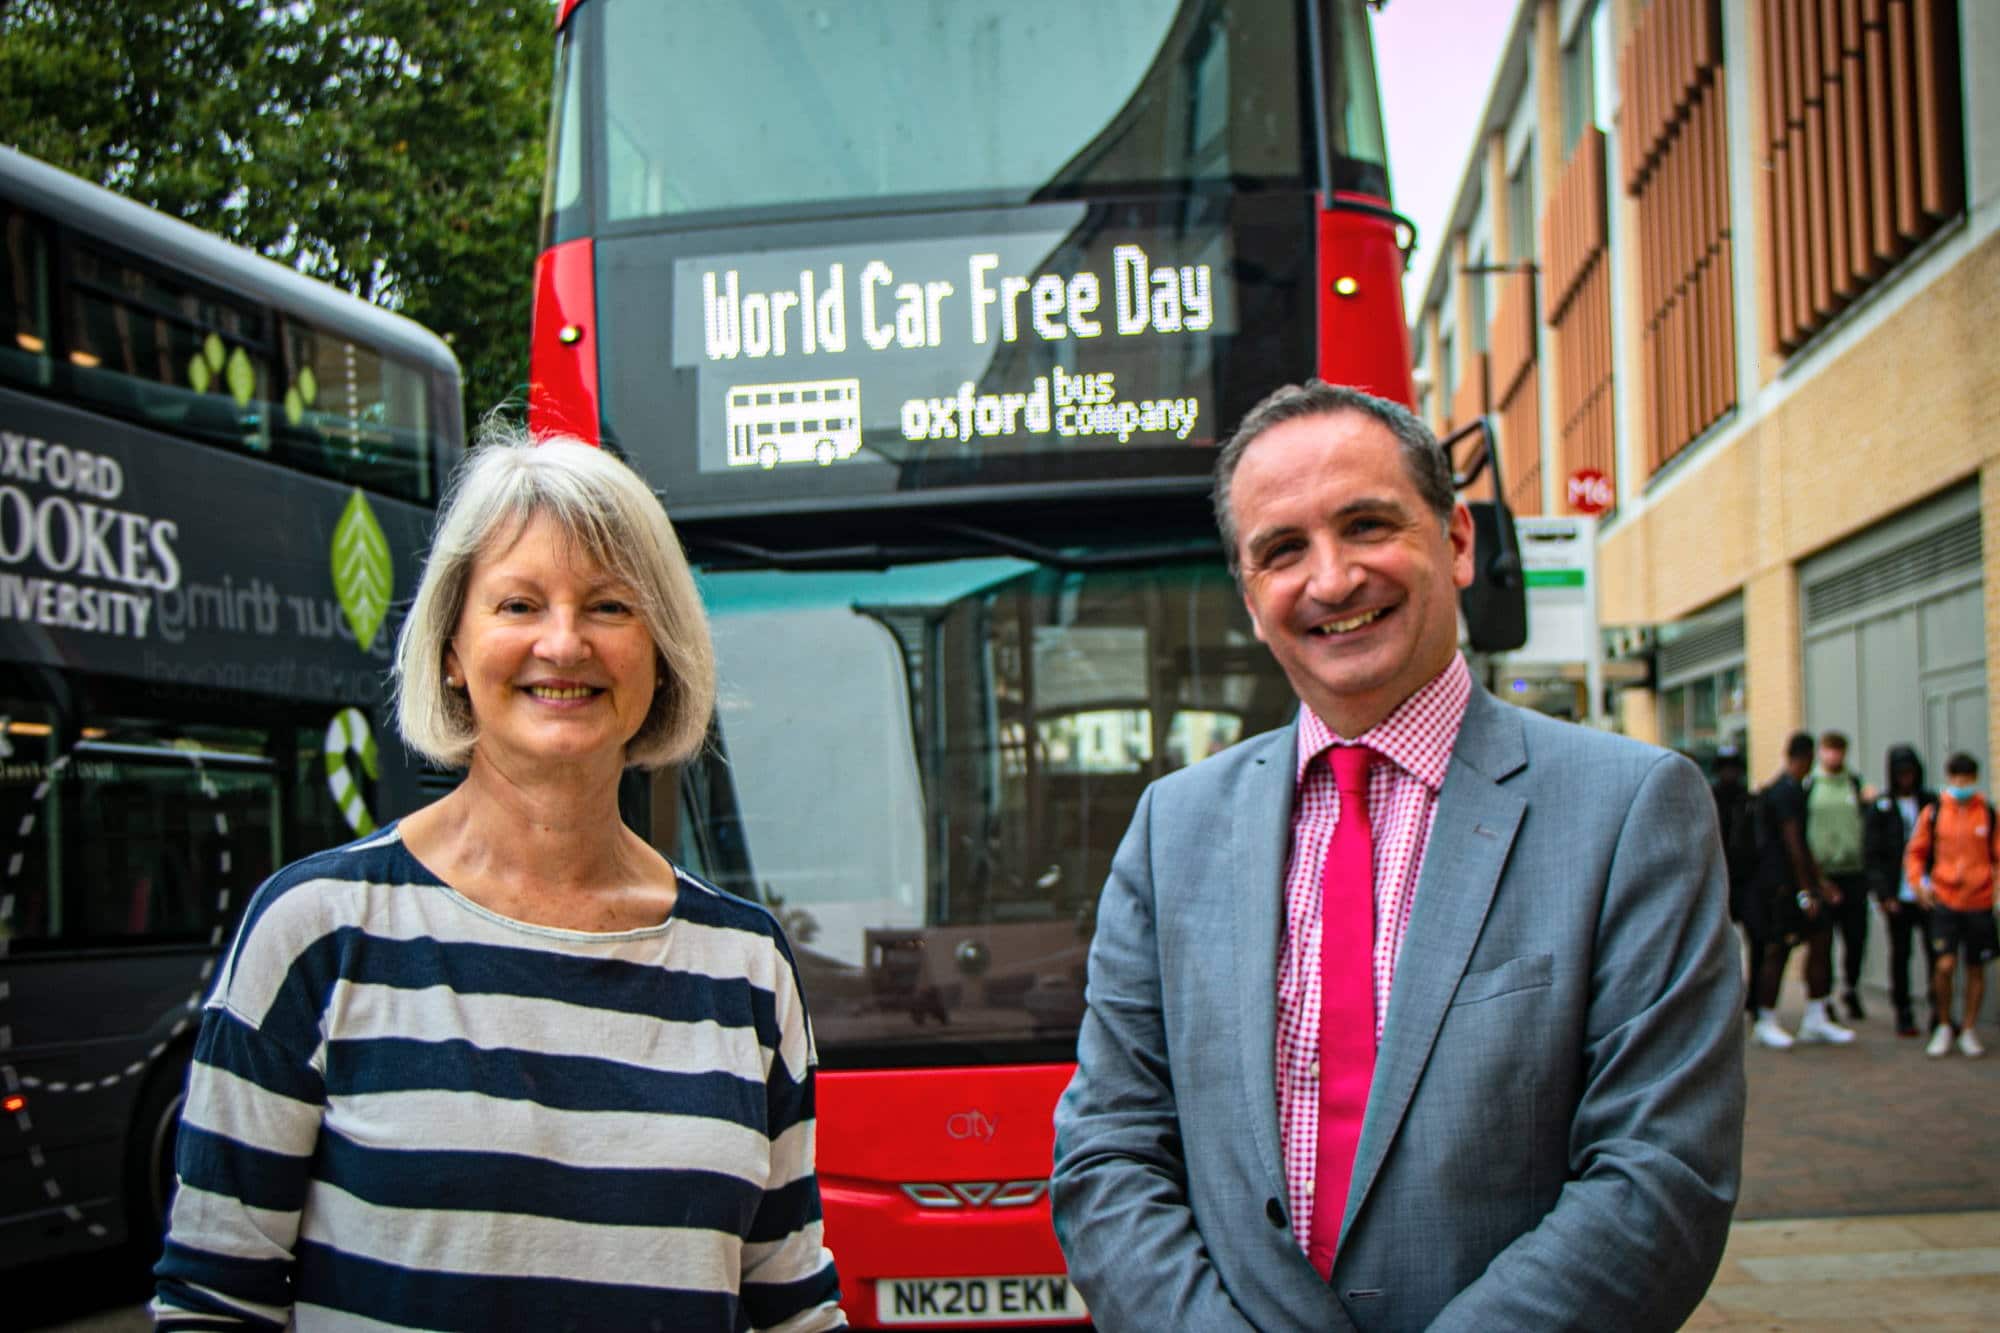 Oxford Bus Company Back to Bus - Phil Southall - September 2021